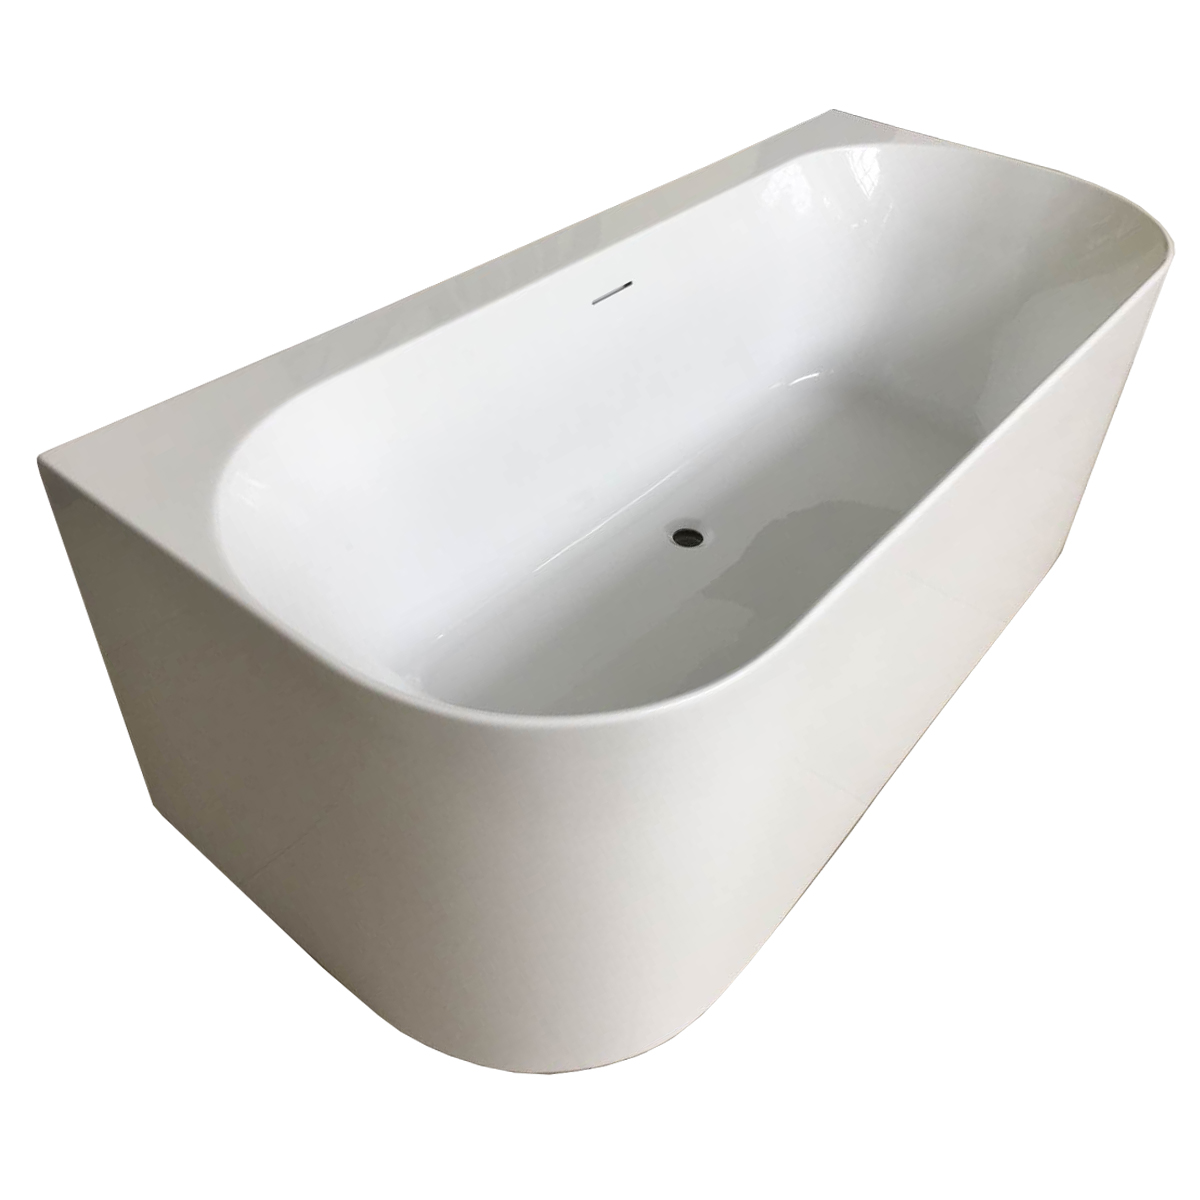 DST-WMOCB00 One-Wall Mounted Tub 3/4 View